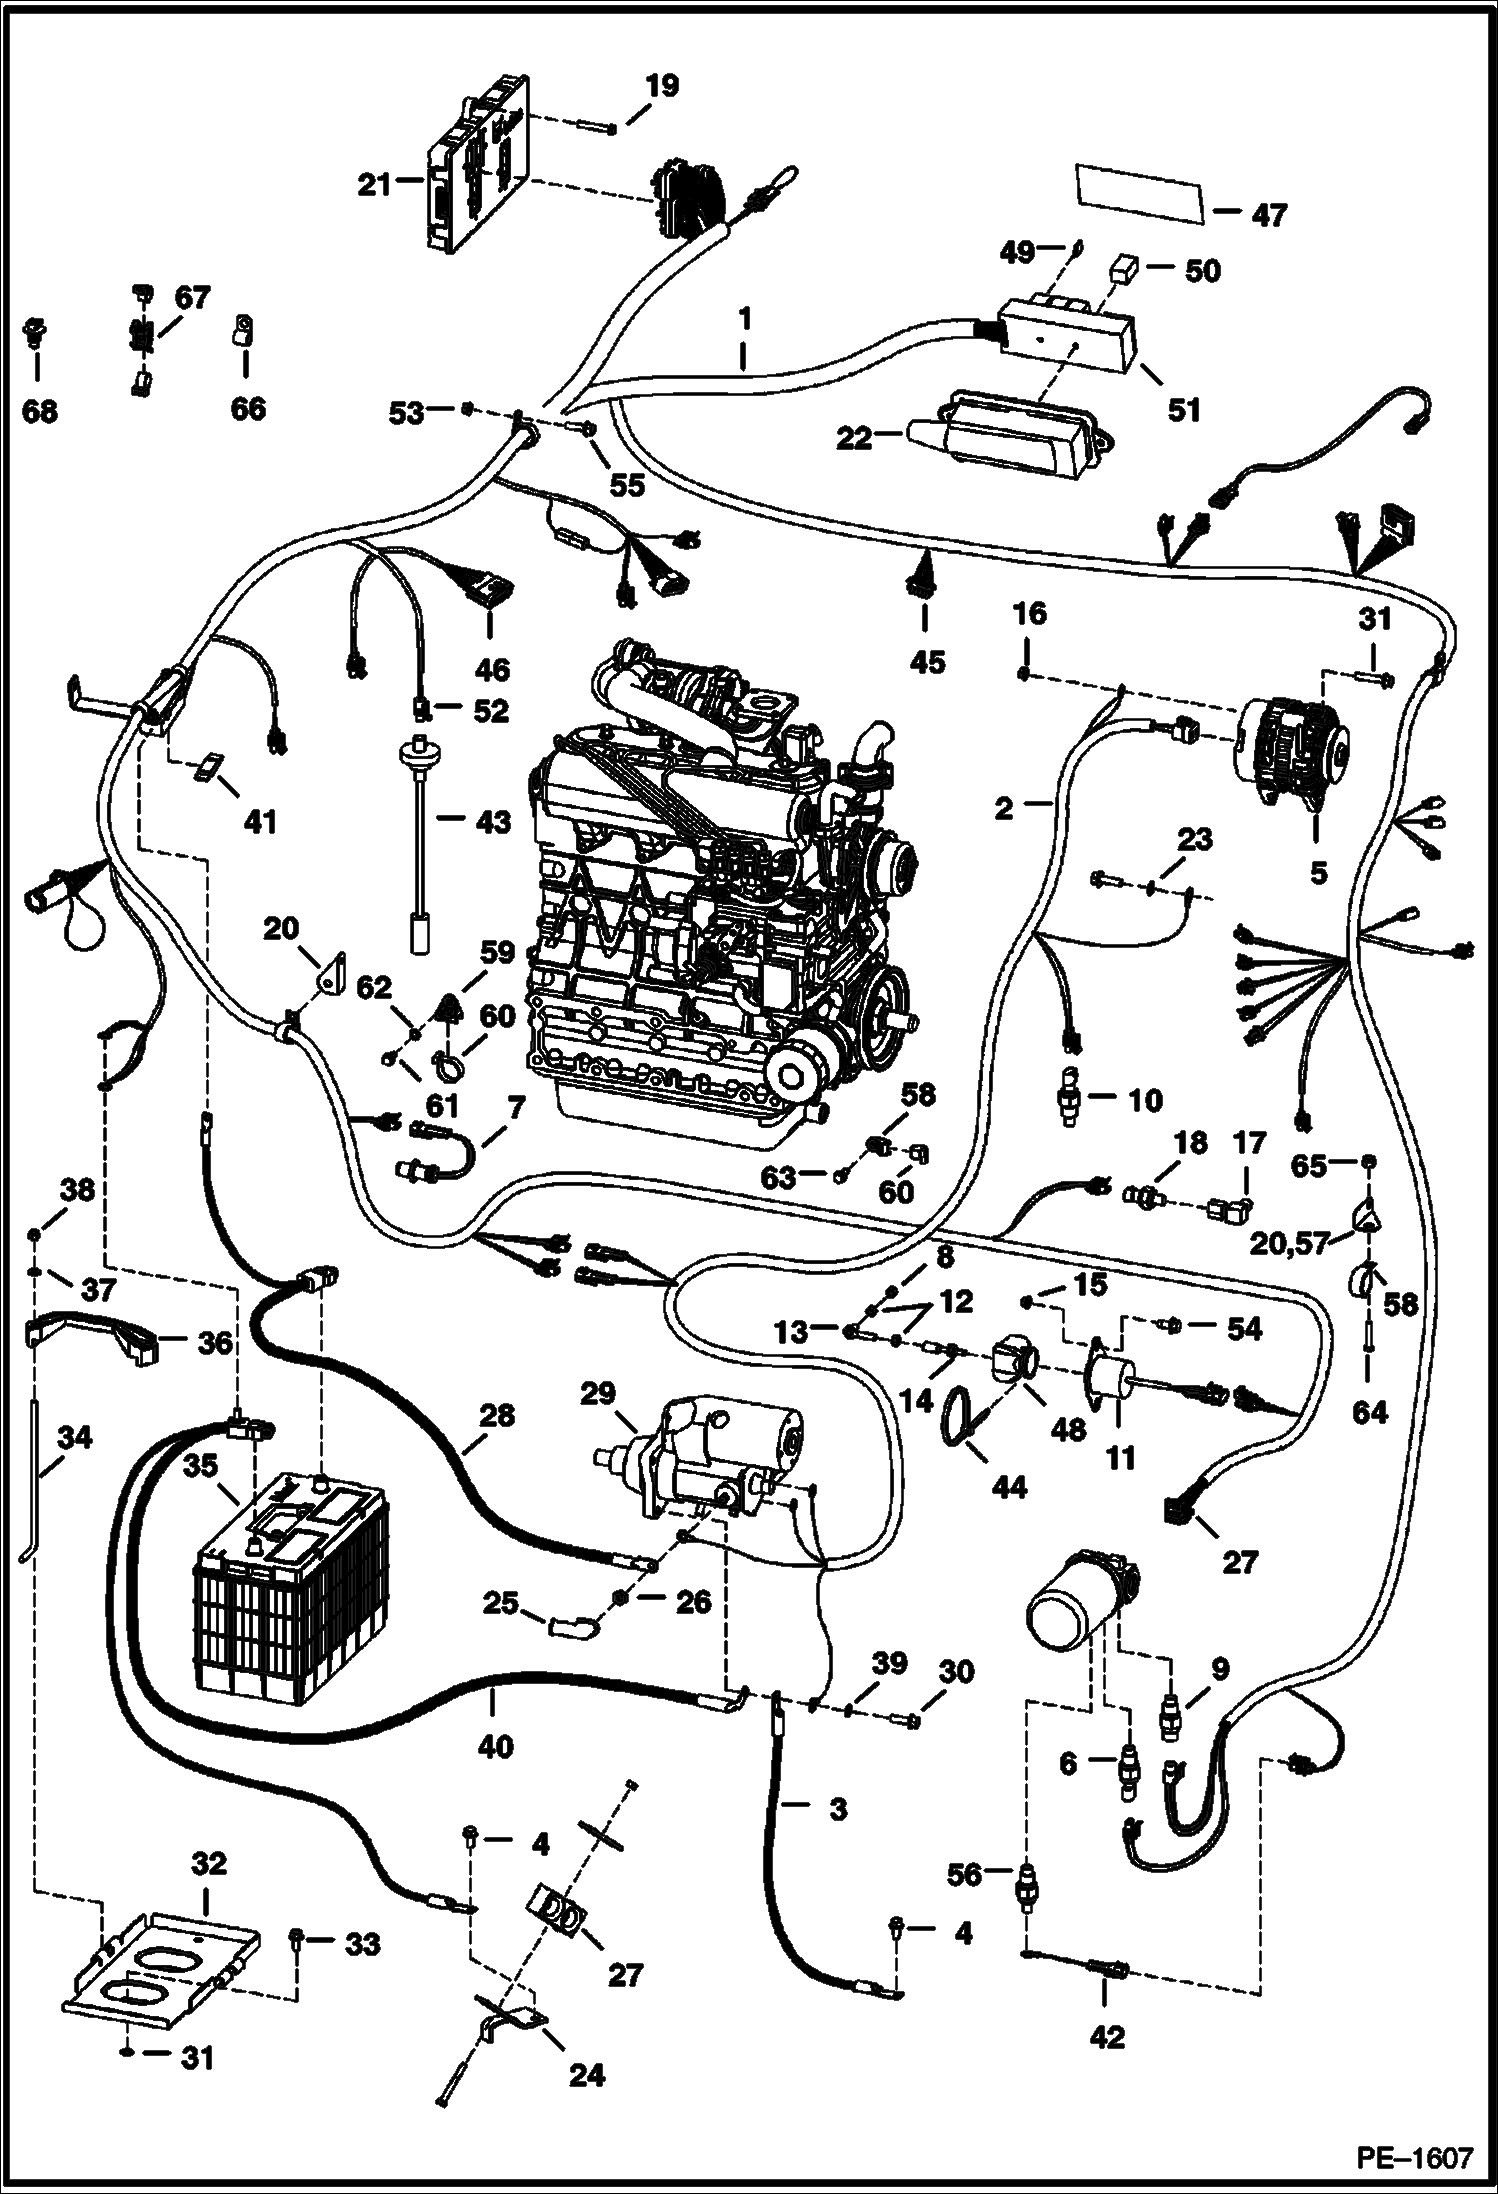 Схема запчастей Bobcat 700s - ENGINE ELECTRICAL CIRCUITRY (S/N 5158 35000 & Above, 5162 22000 & Above) ELECTRICAL SYSTEM